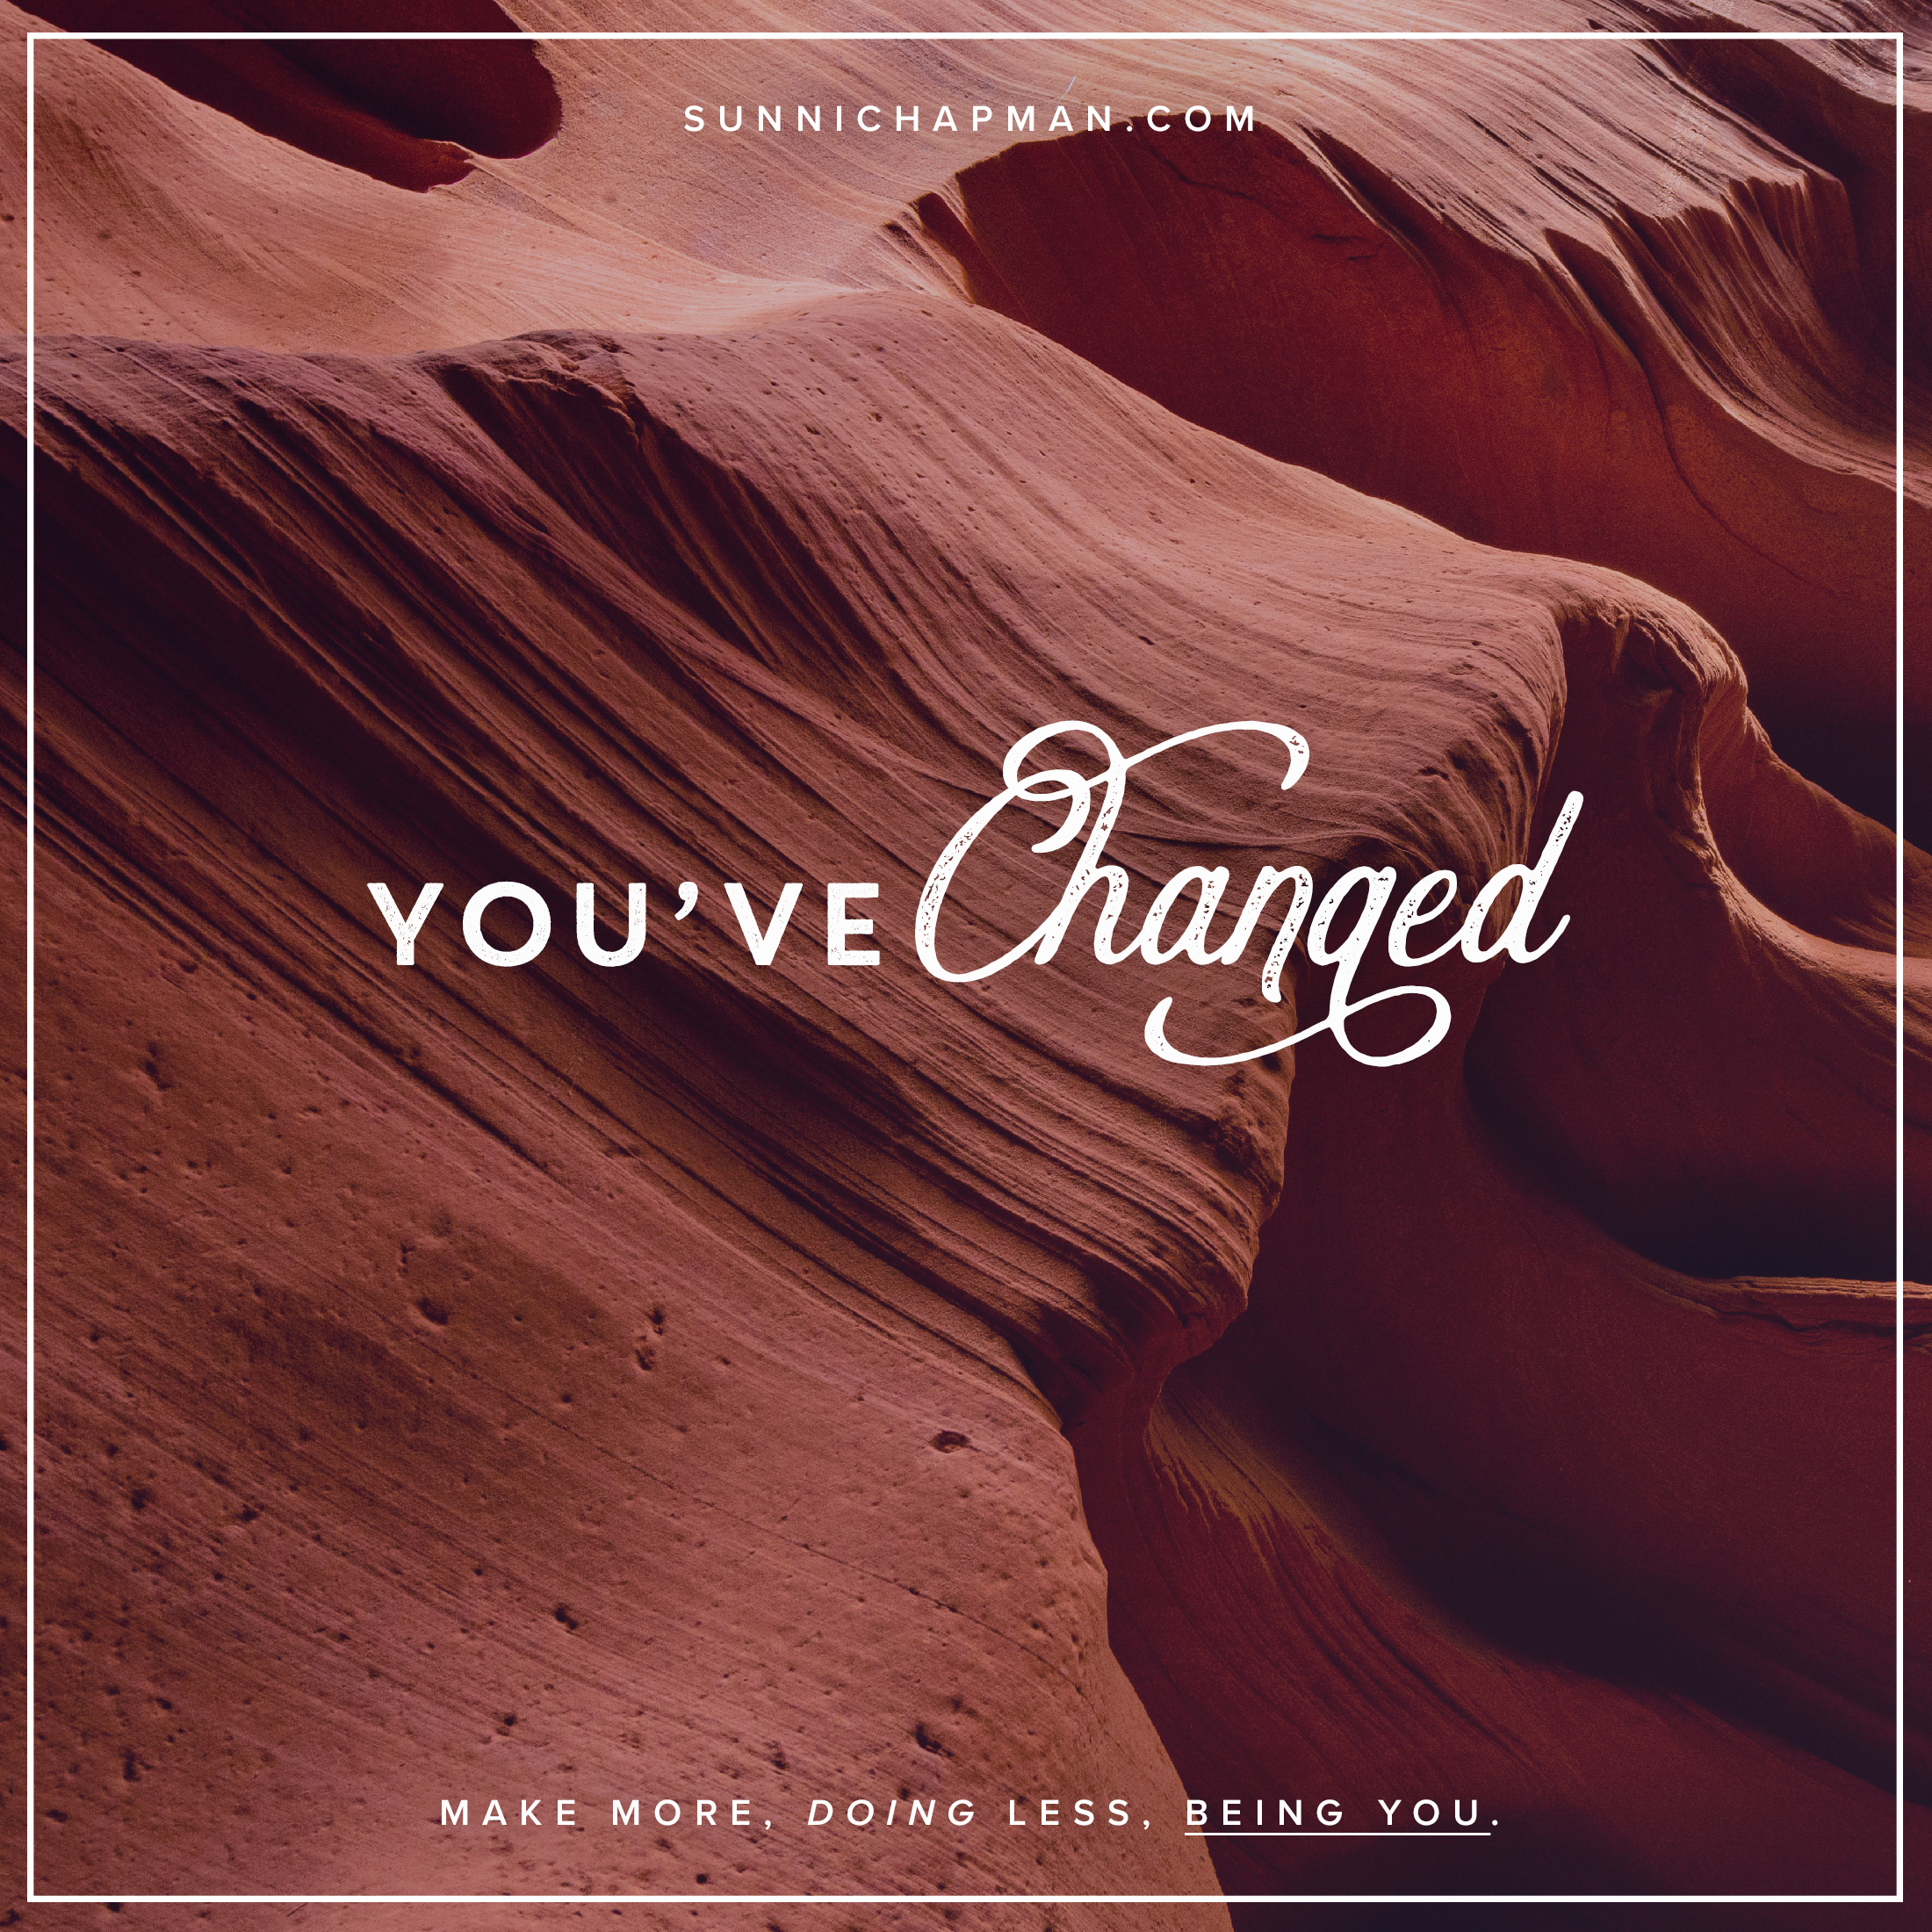 The image appears to be a motivational or inspirational graphic. It features a background of what looks like smooth, curved rock formations, typical of sandstone canyons. Overlaid on this image is text in a decorative, cursive font that says "You've Changed" at the center. Below this, in a smaller, simpler font, it reads "MAKE MORE, DOING LESS, BEING YOU." At the top of the image, there is a URL: "SUNNICHAPMAN.COM". The overall design suggests a theme of personal growth or self-improvement, encouraging the viewer to embrace change and focus on being authentic while achieving more by doing less.